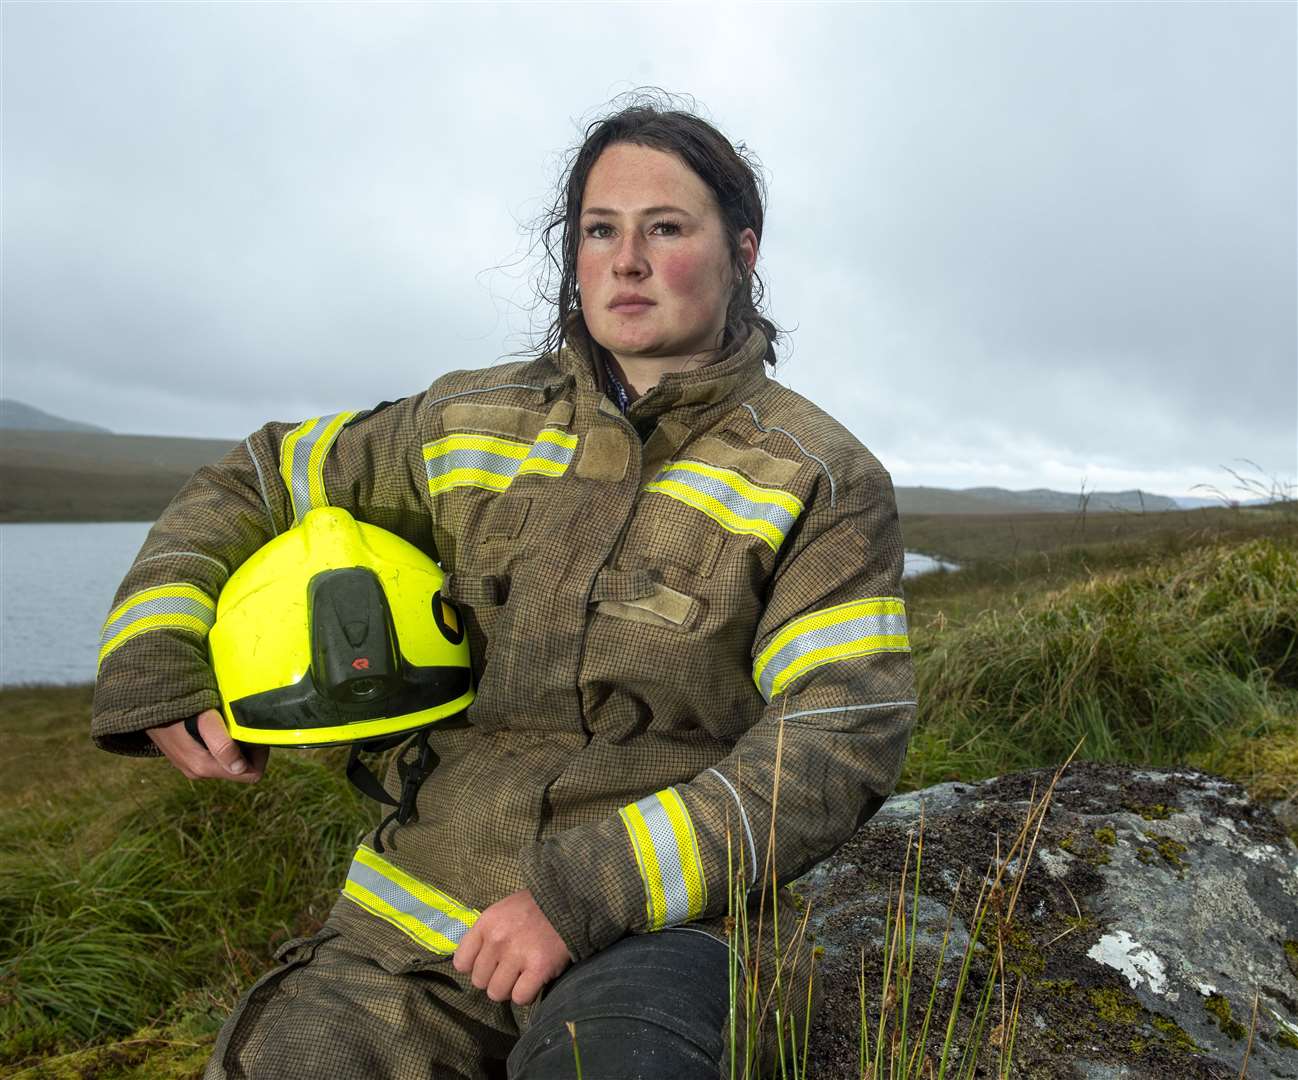 As well as being a trailblazer in her lecturing career, Sophie Clark is a retained firefighter serving her community.